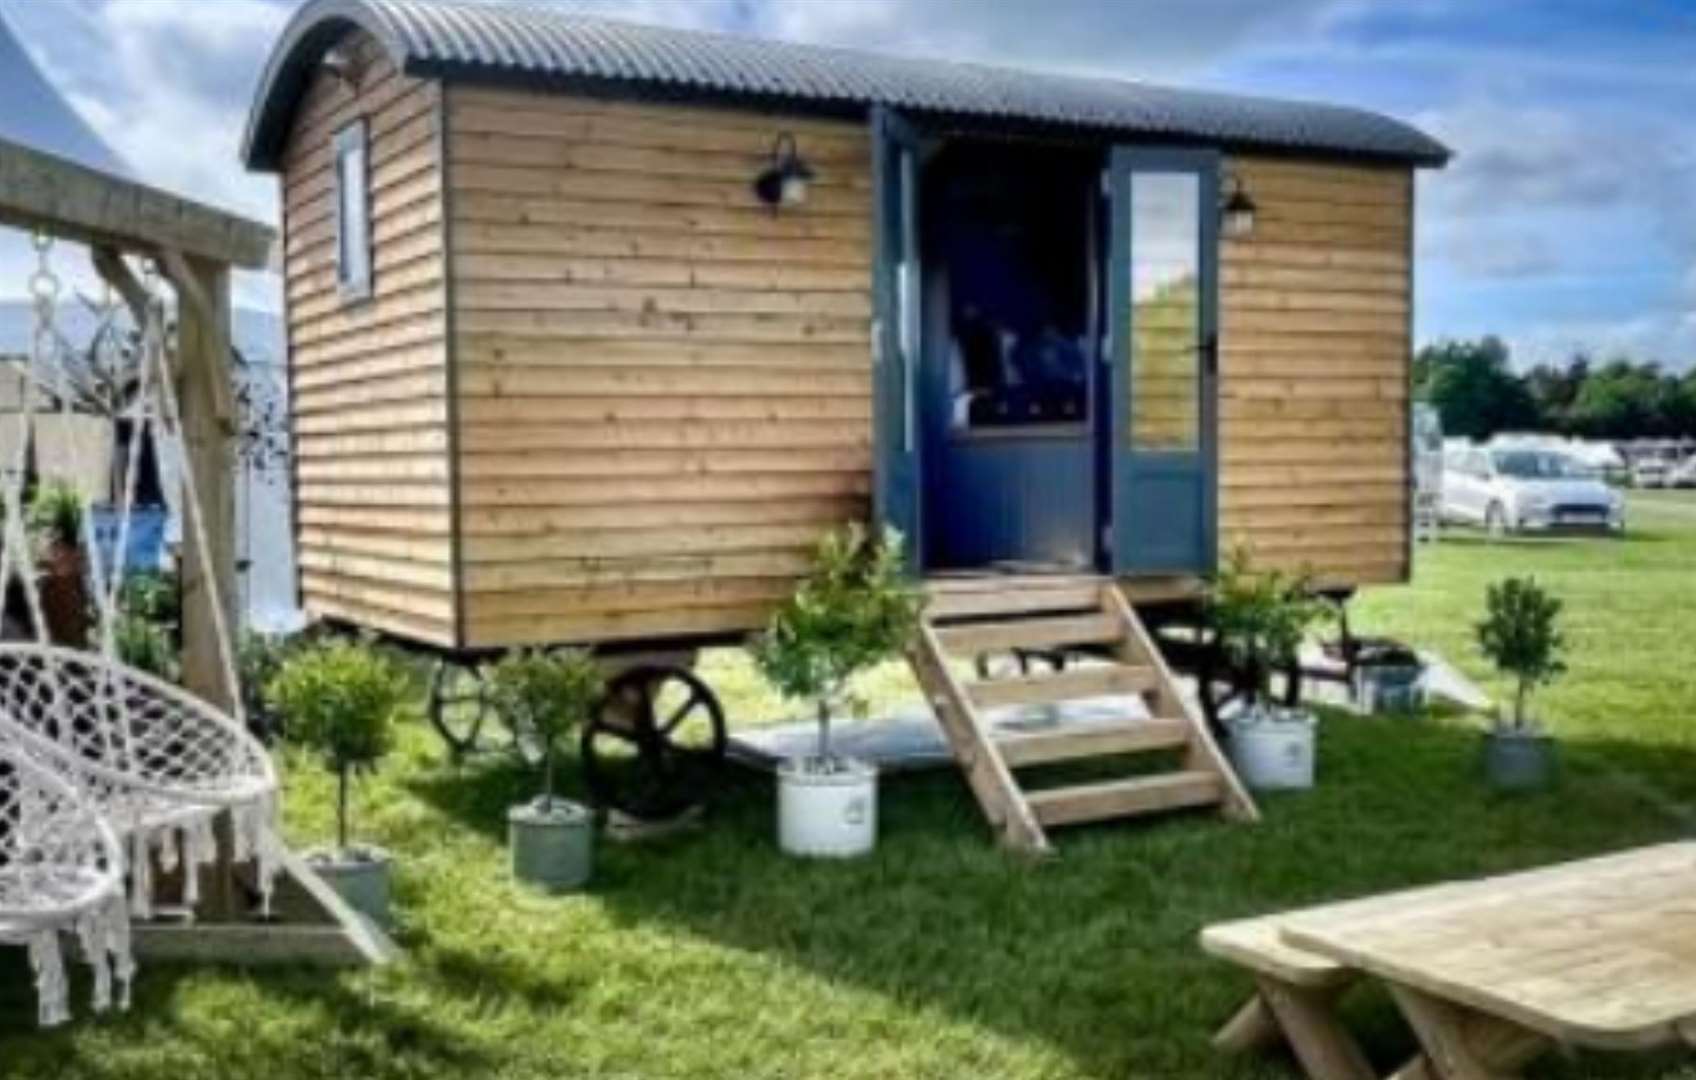 What the proposed five shepherds huts could look like. Picture: ABC planning